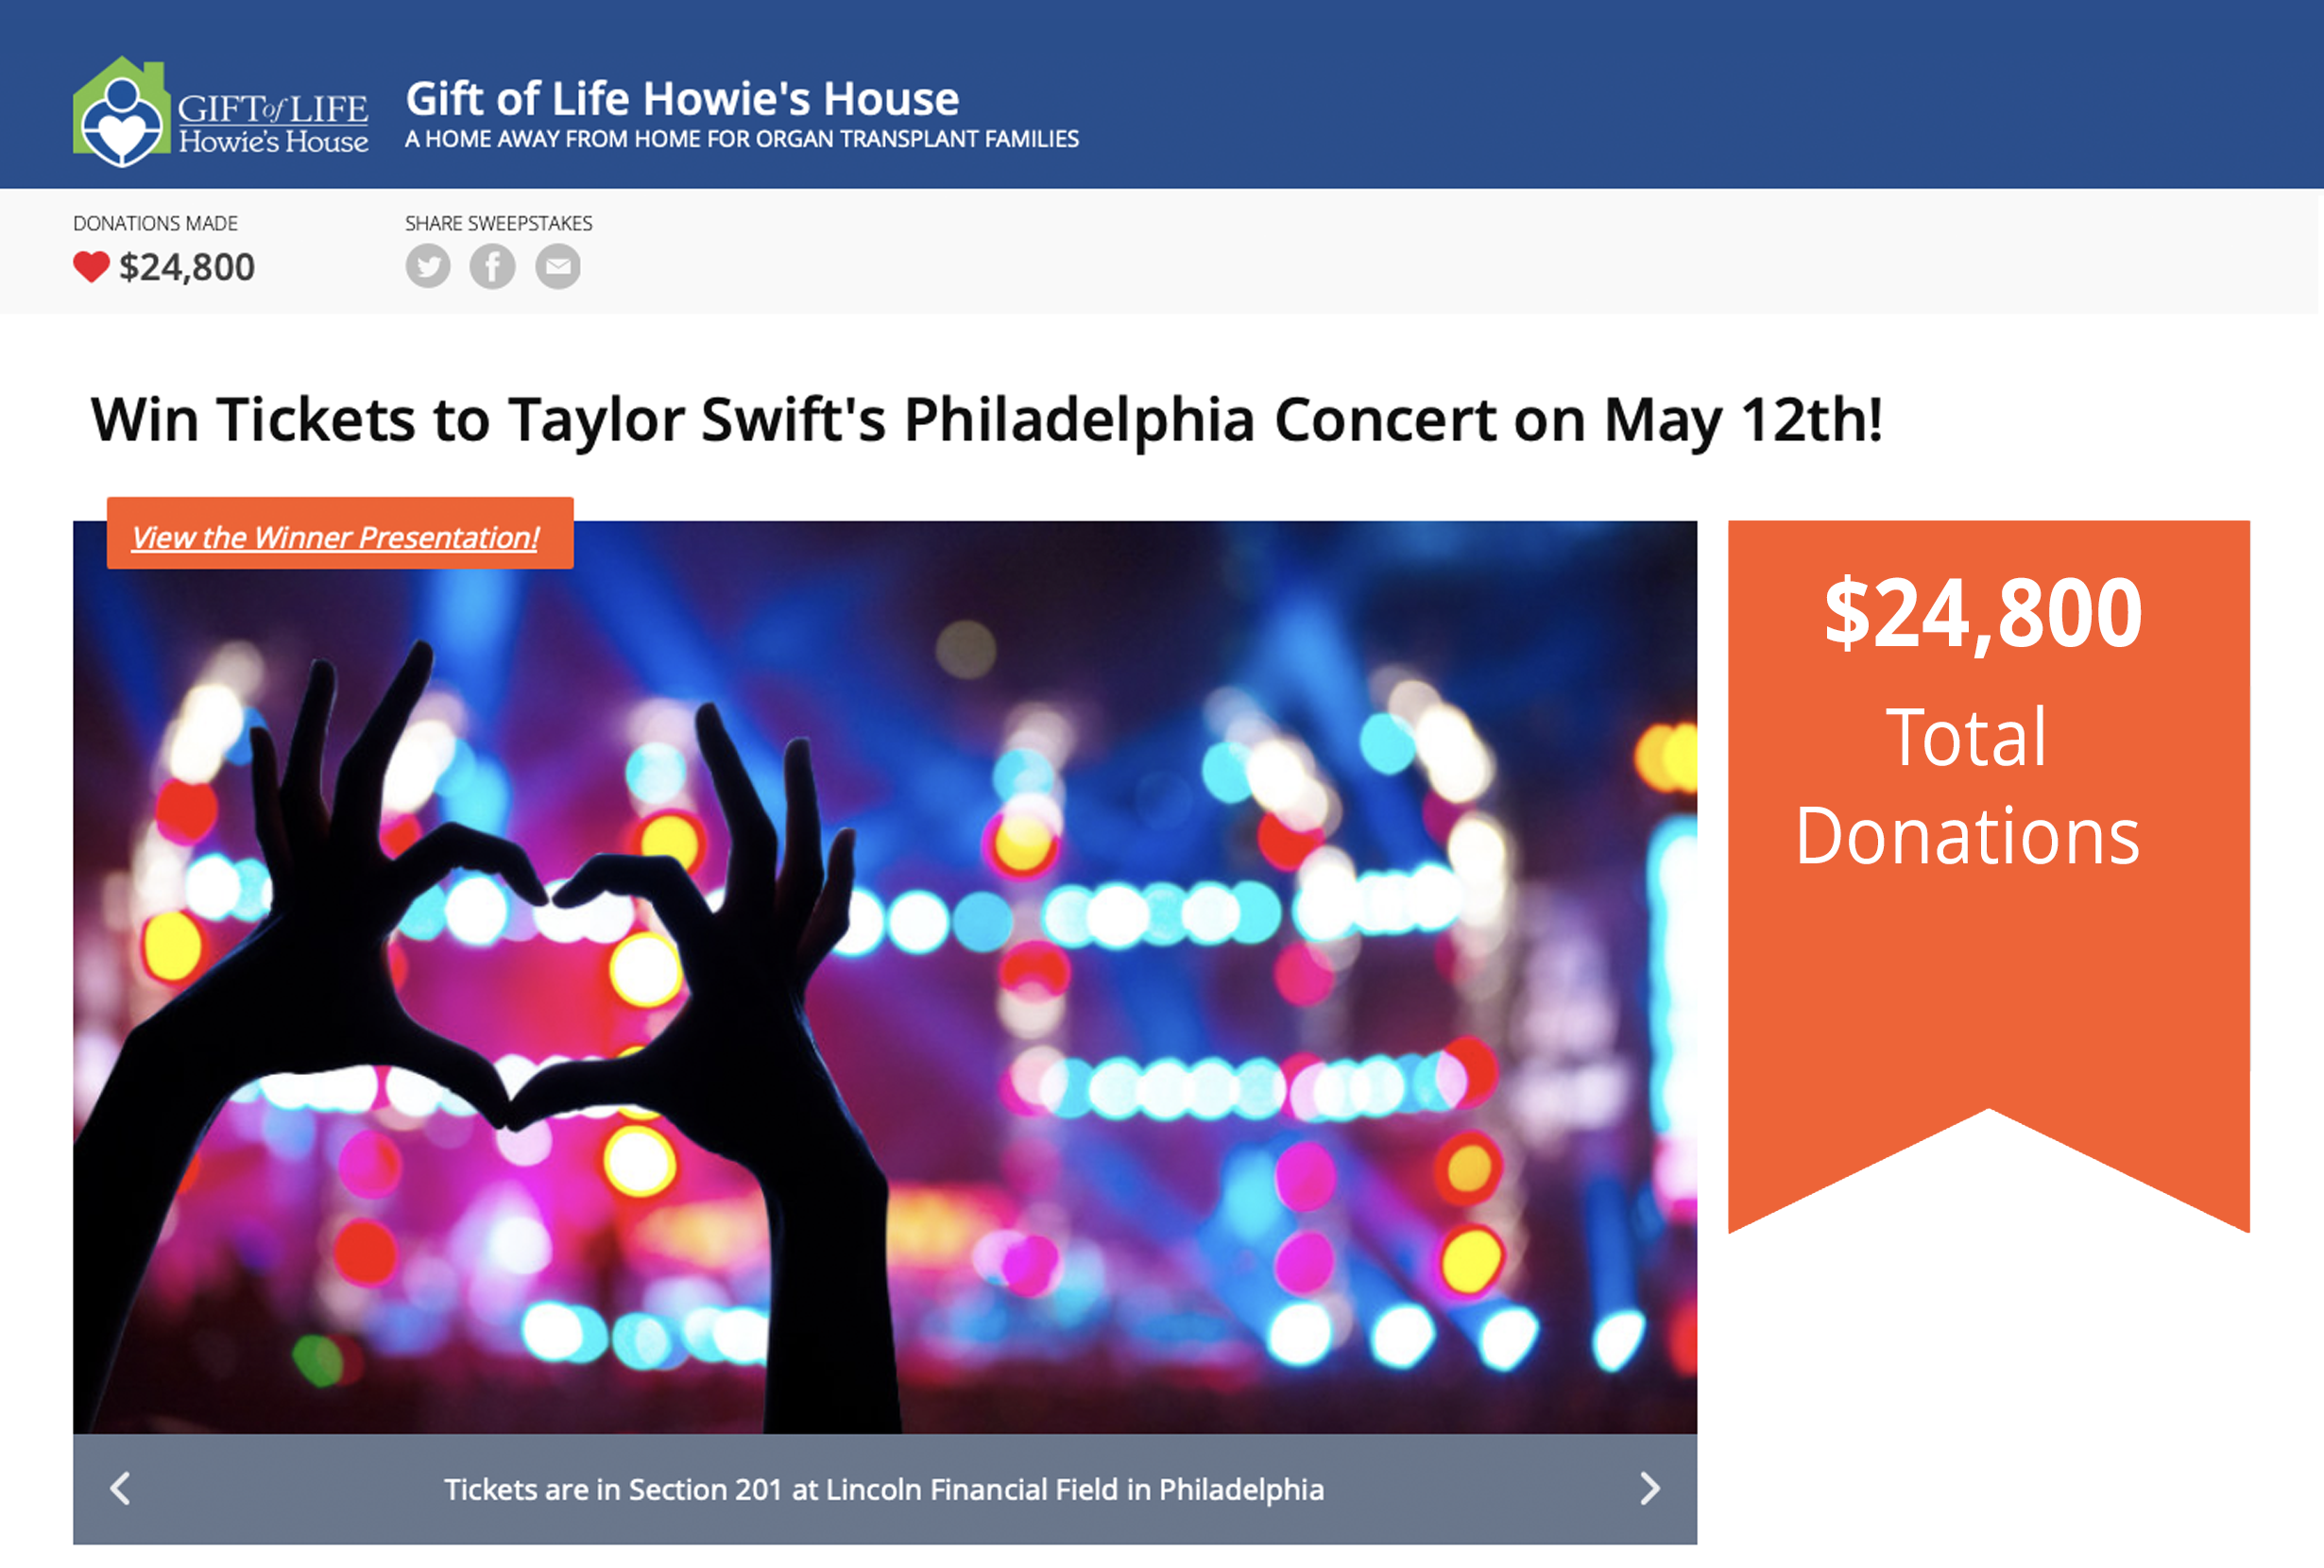 howies-gift-taylor-swift.png